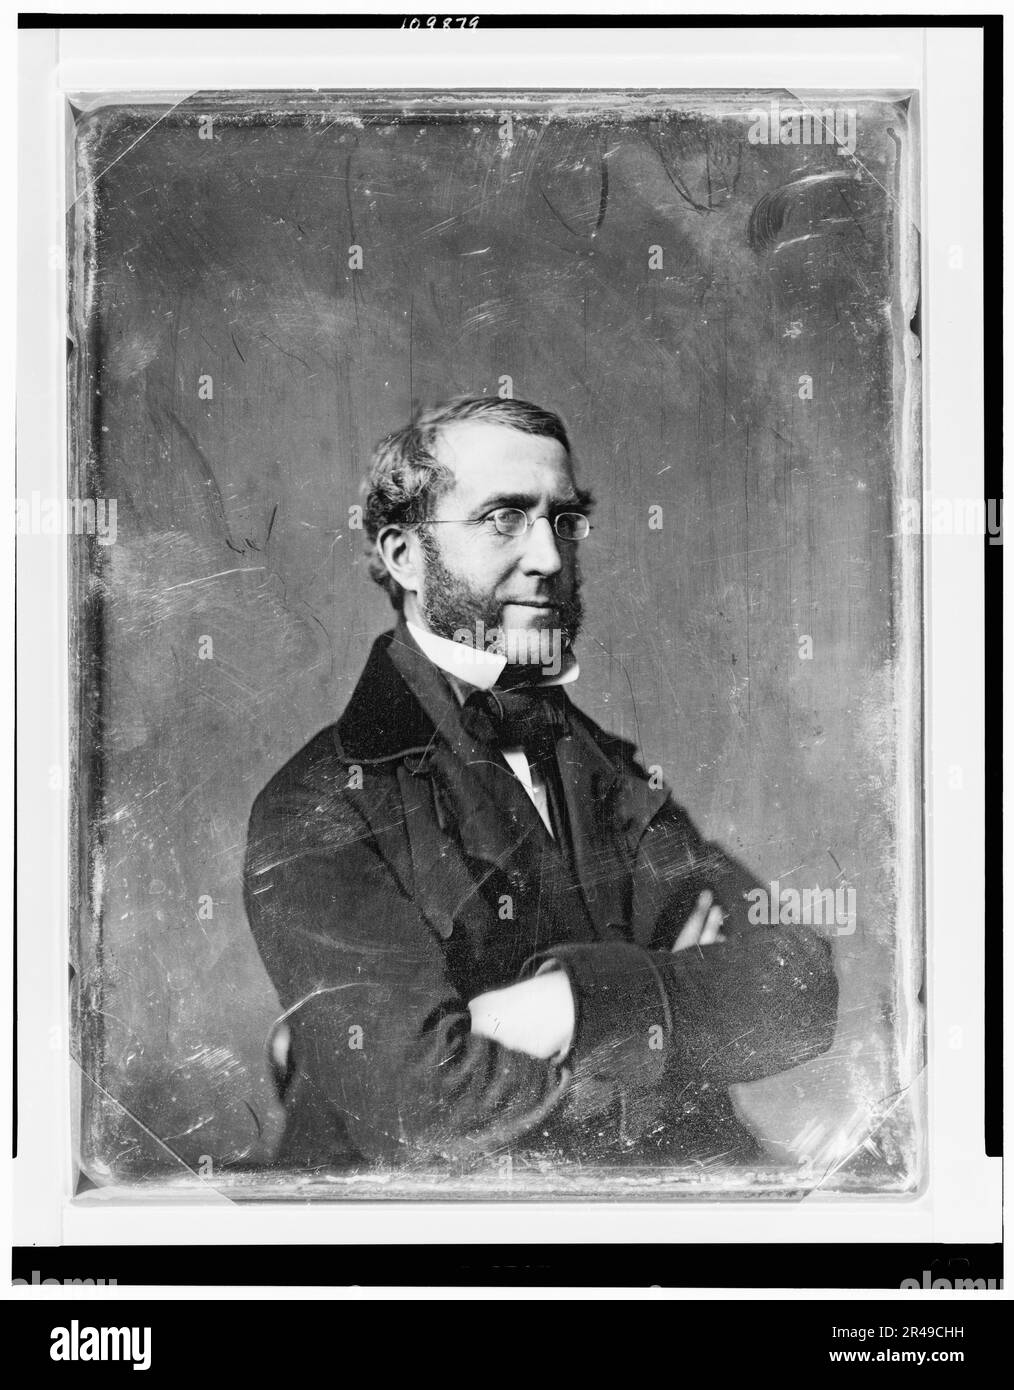 Man, possibly John H. Craig, half-length portrait, three-quarters to right, arms crossed, with side whiskers, wearing spectacles, between 1844 and 1860. Stock Photo